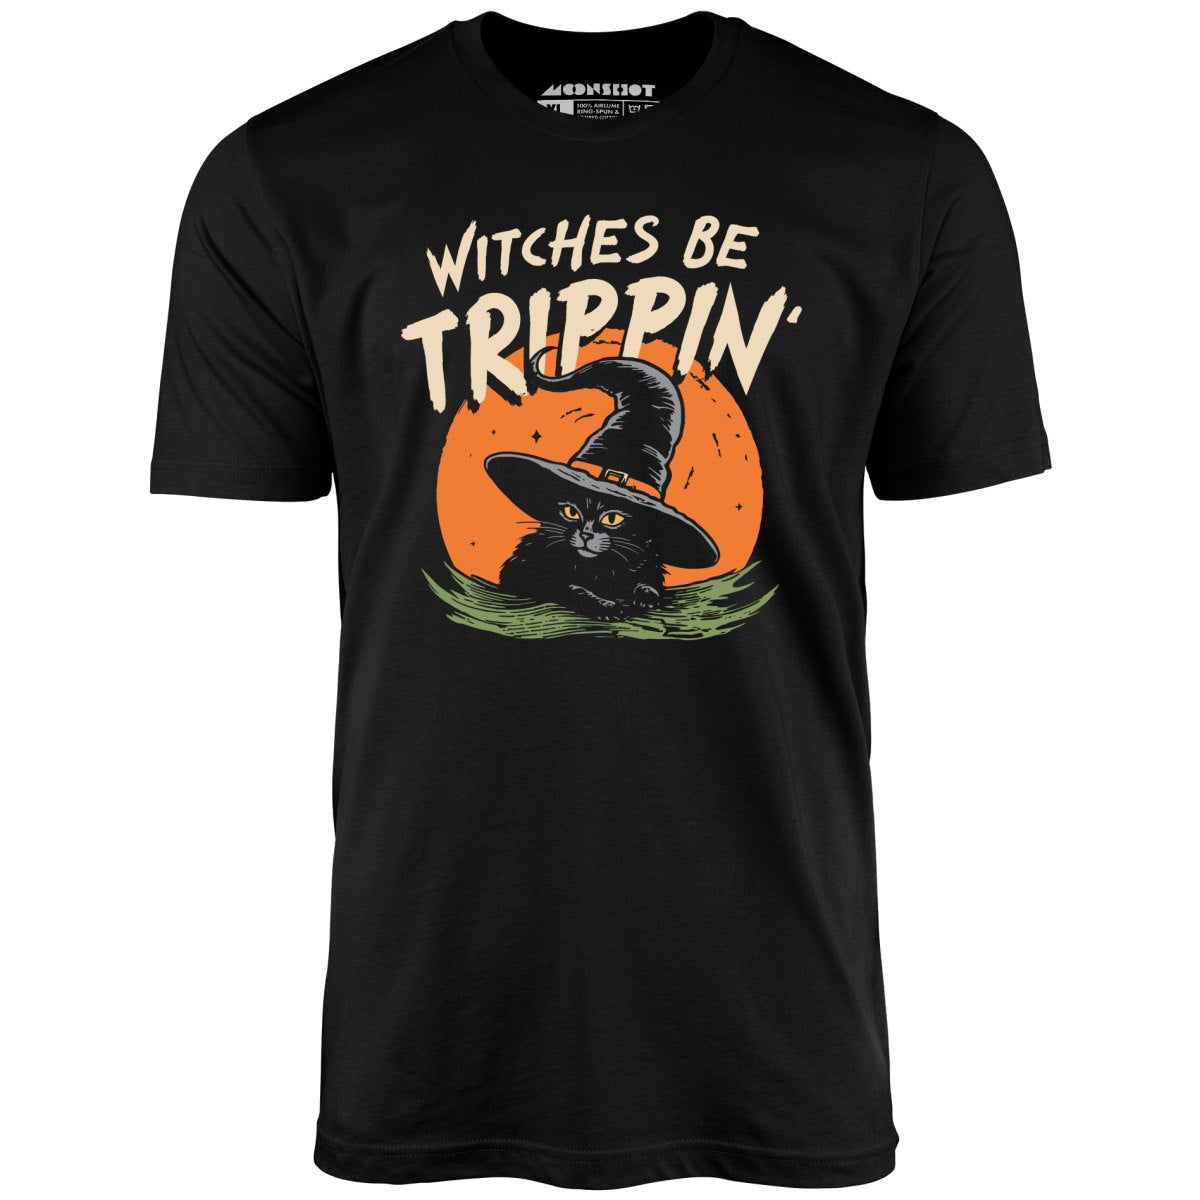 Witches Be Trippin' - Unisex T-Shirt